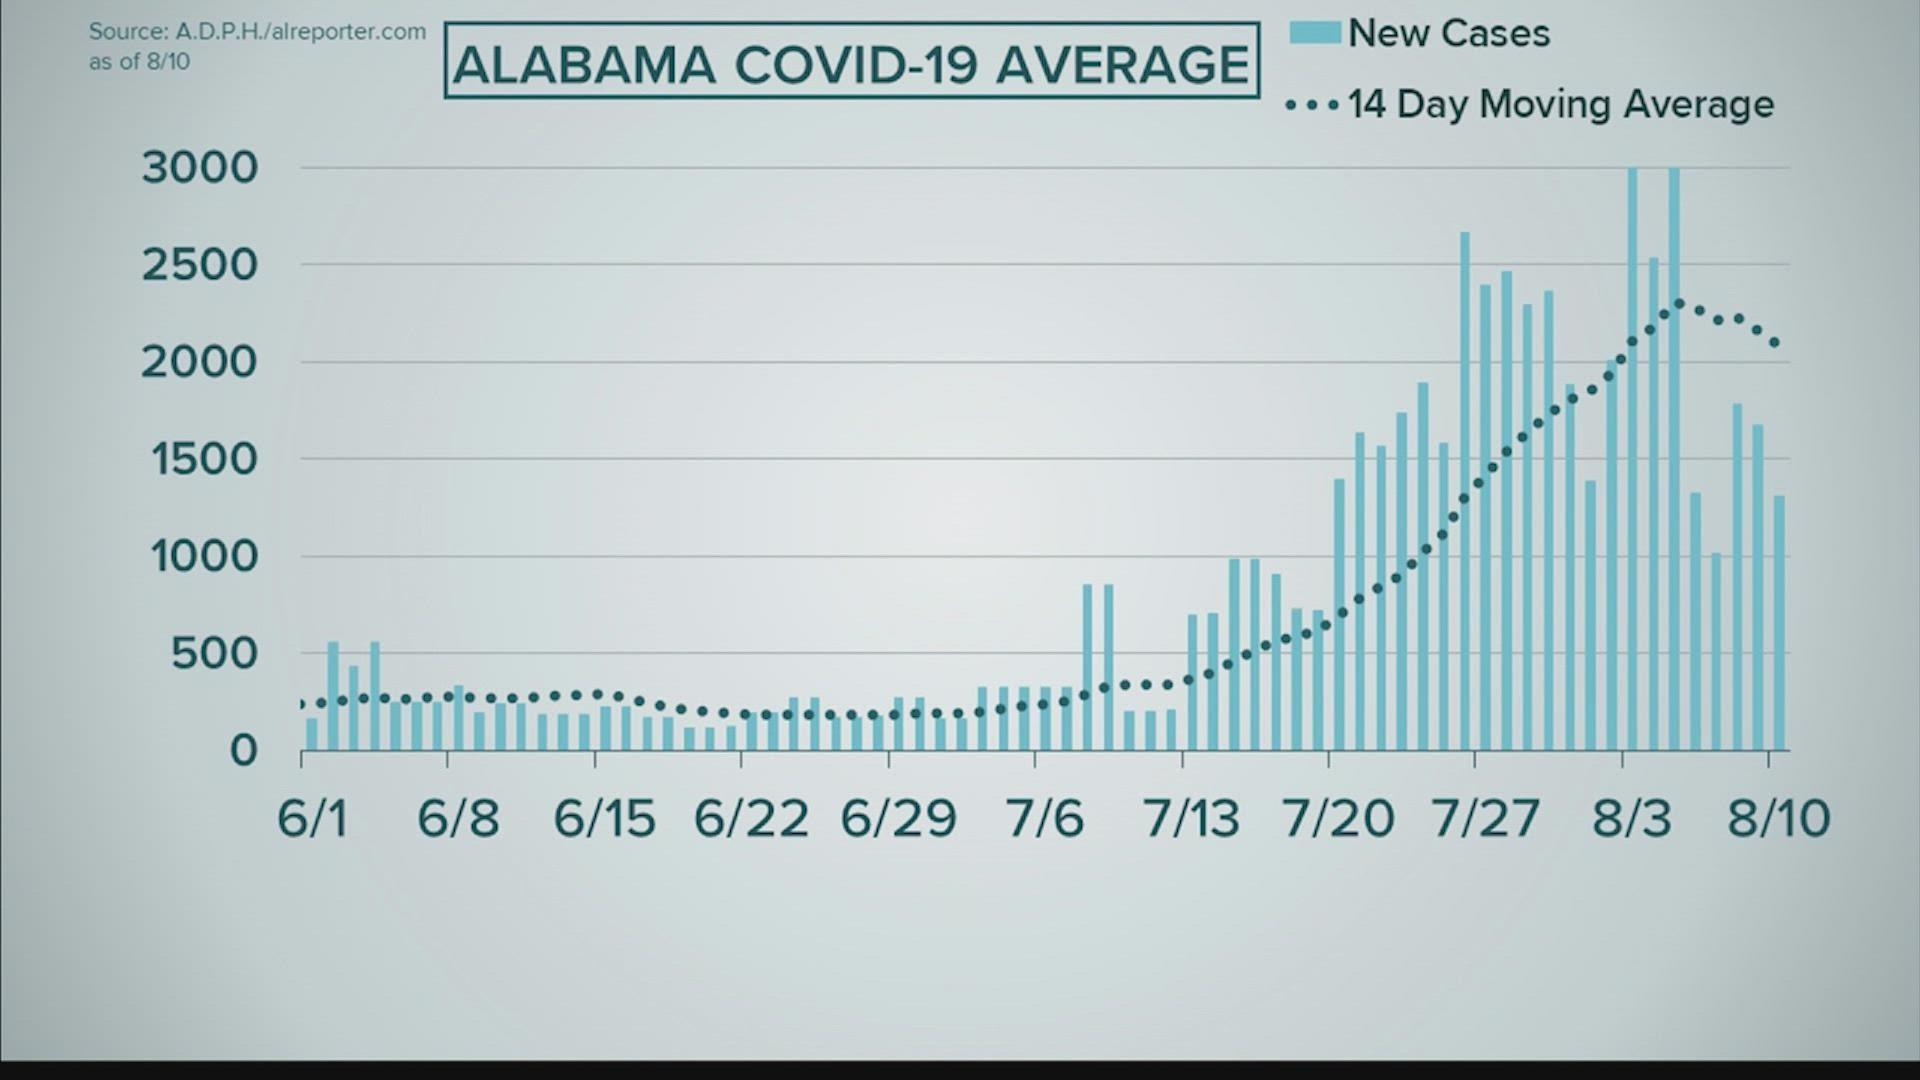 All 67 Alabama counties are at a high level of community COVID-19 transmission as of August 10, according to the ADPH's COVID-19 dashboard.